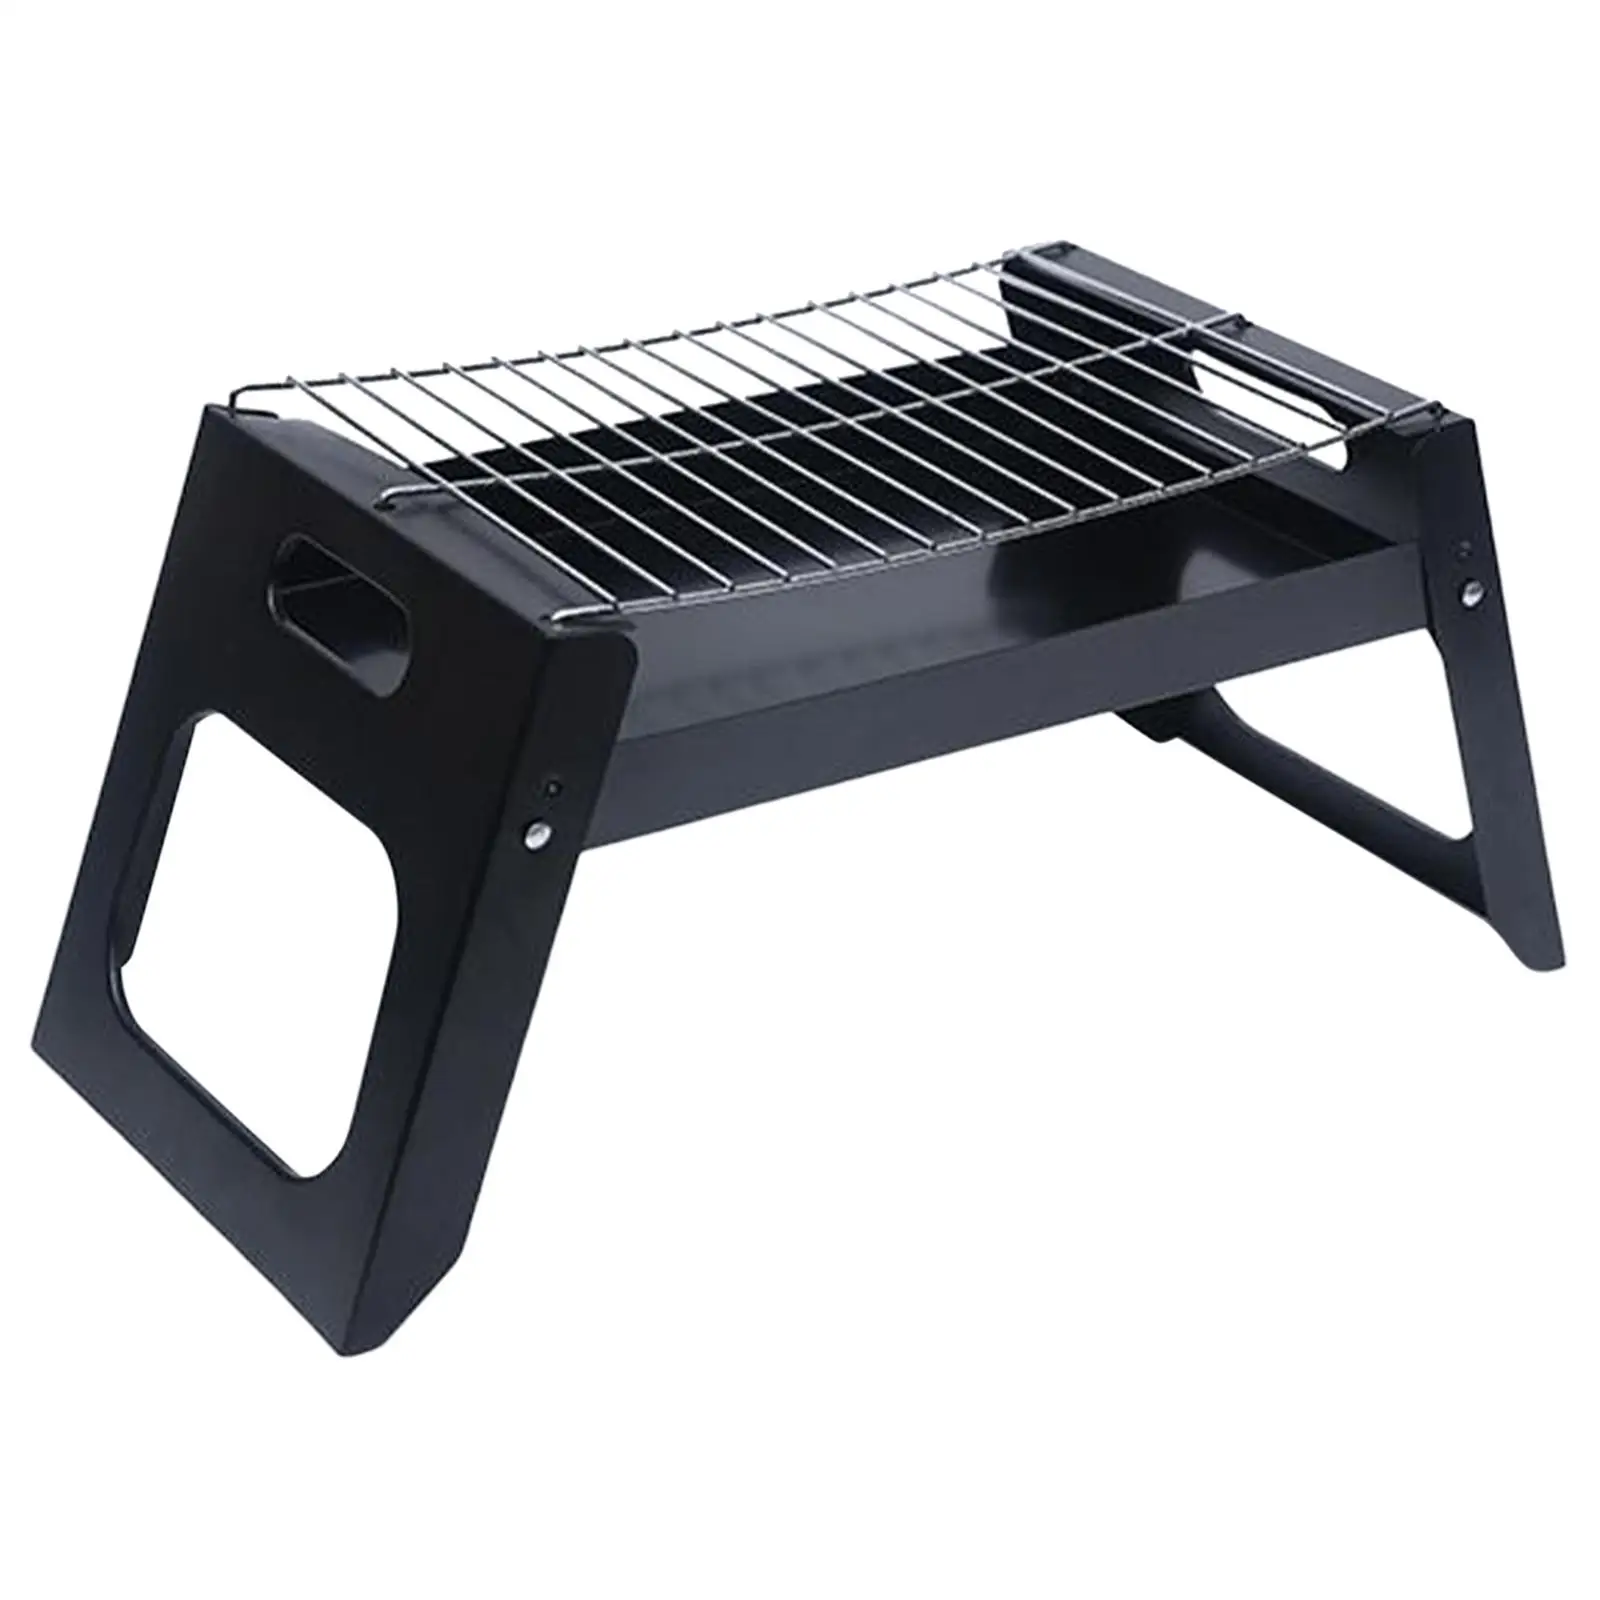 Portable BBQ Grill Stove Folding Wood Burning Stove Furnace Non Stick for Camping Household Traveling Barbecue Backyard